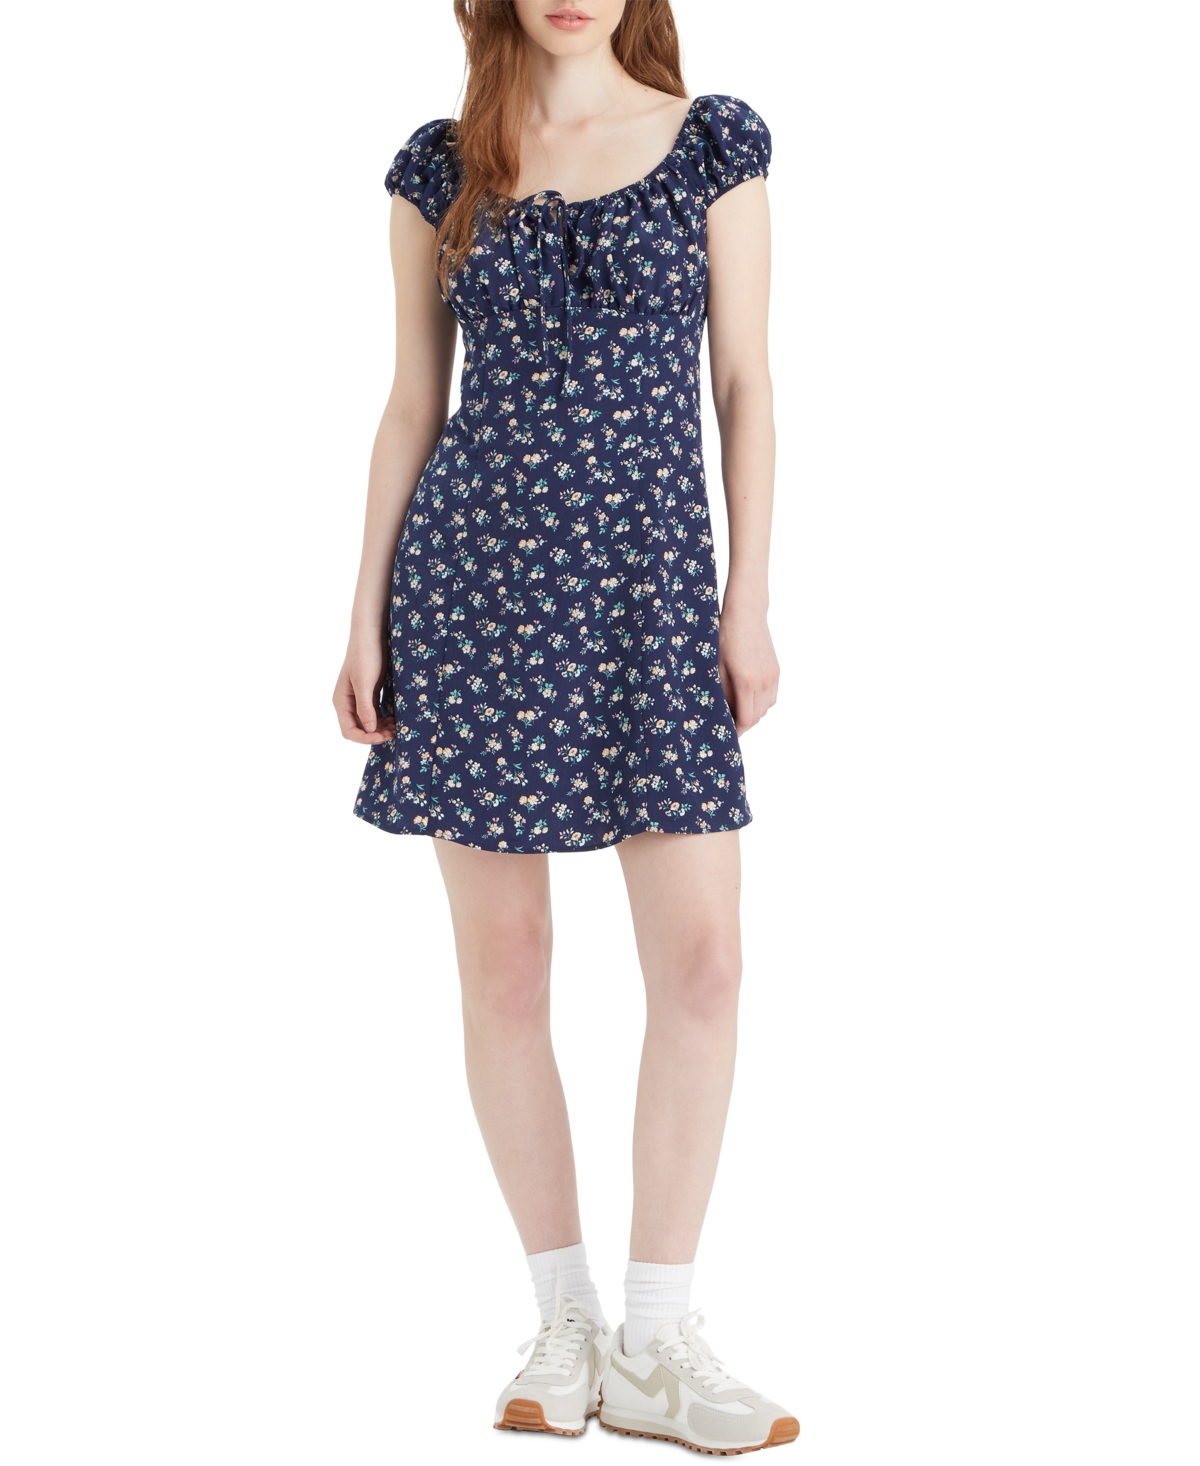 Women's Clementine Printed Cap-Sleeve Dress - Picnic Ditzy Naval Academy